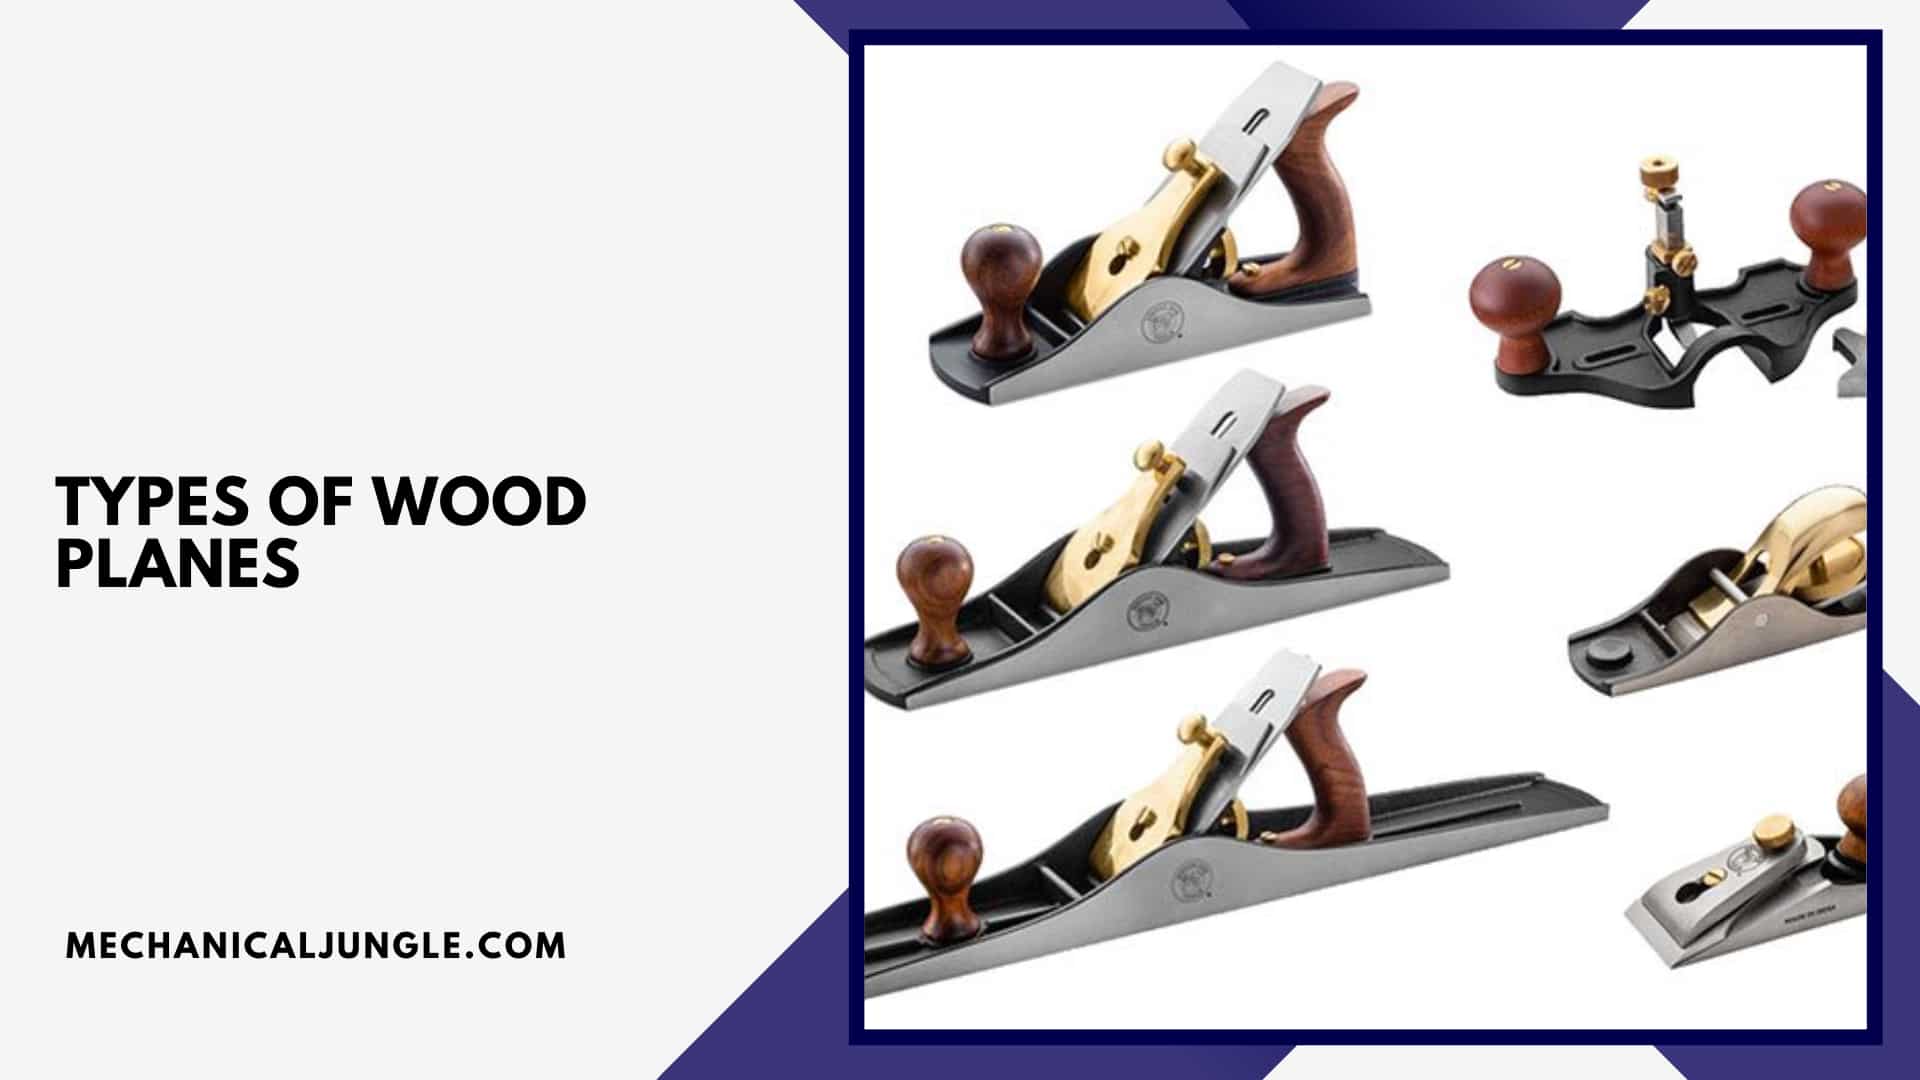 Types of Wood Planes